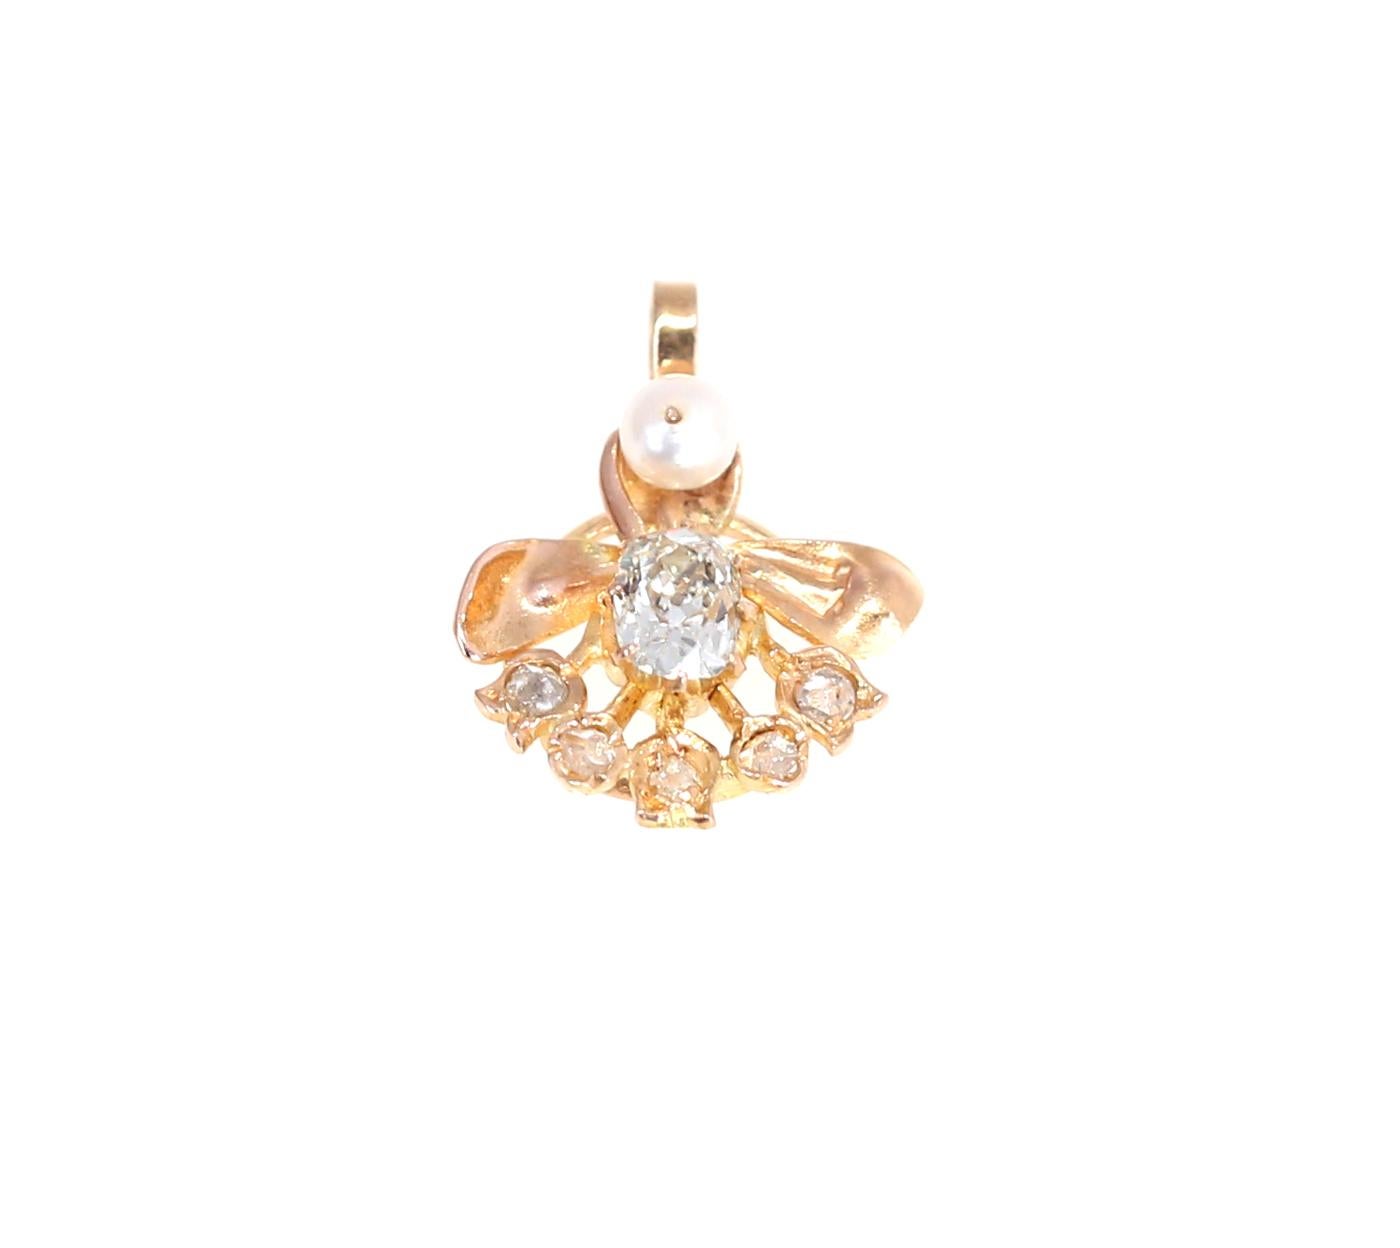 Delicate pendant with a 0.35 Old cut Diamond centre stone and a white Pearl above it. Cast in a Pink Gold.
With a certain degree of imagination, it can represent a small angel, where the Pearl is a head. Sold without a chain.
Really delicate and